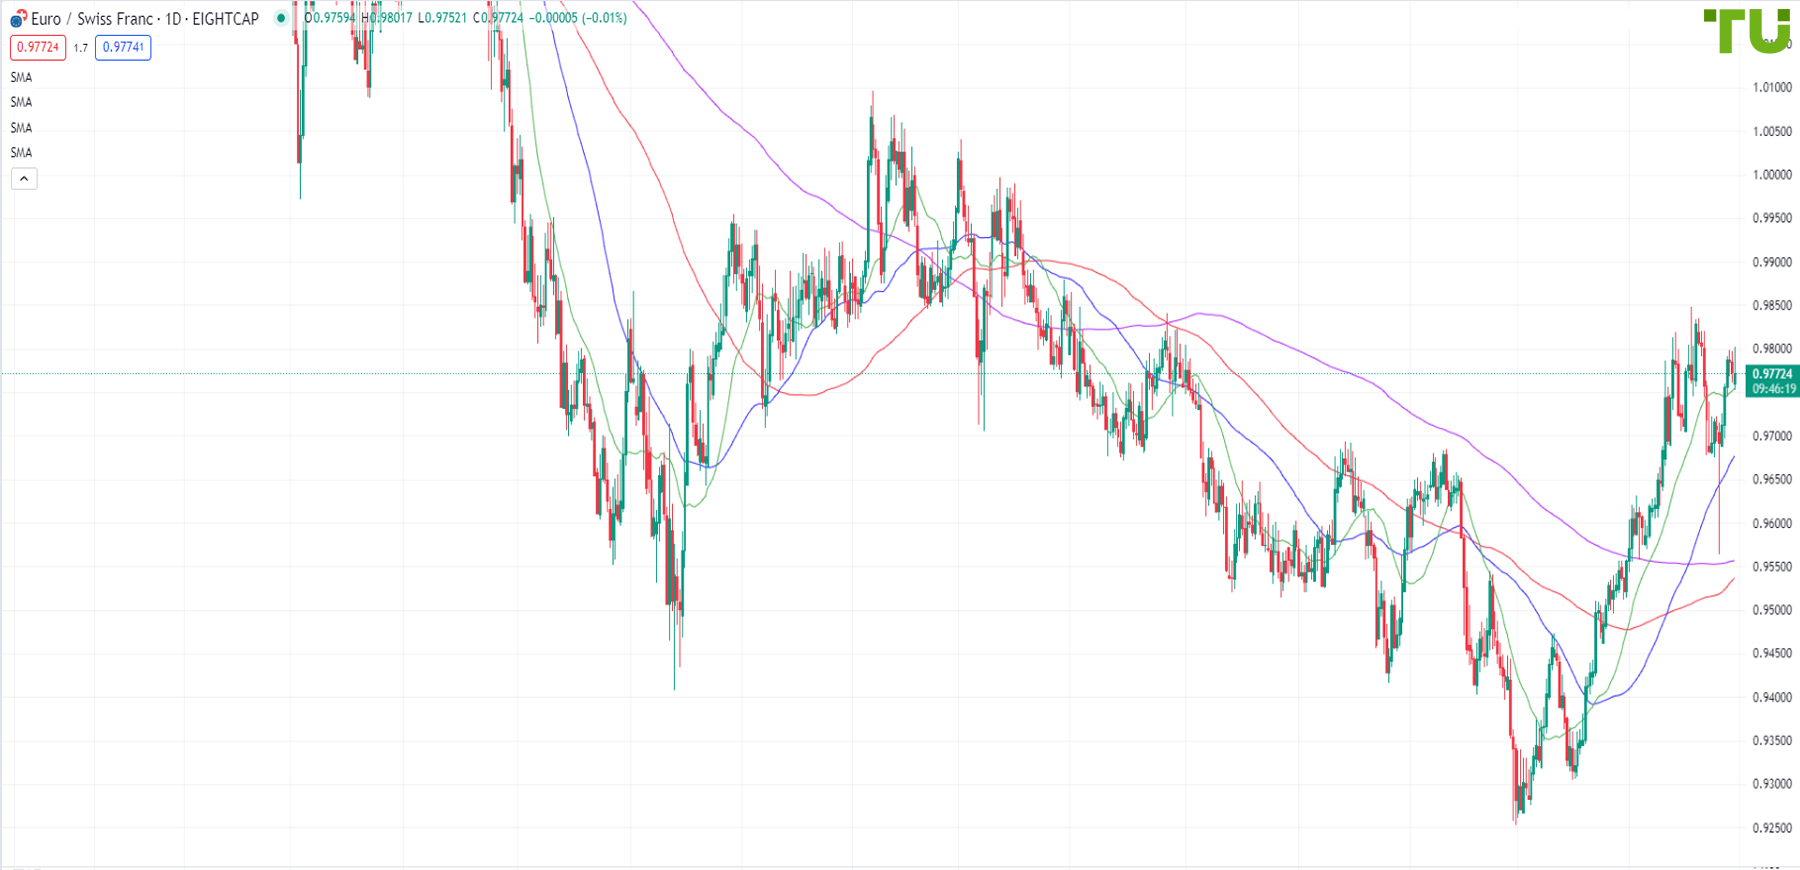 EUR/CHF is under moderate pressure